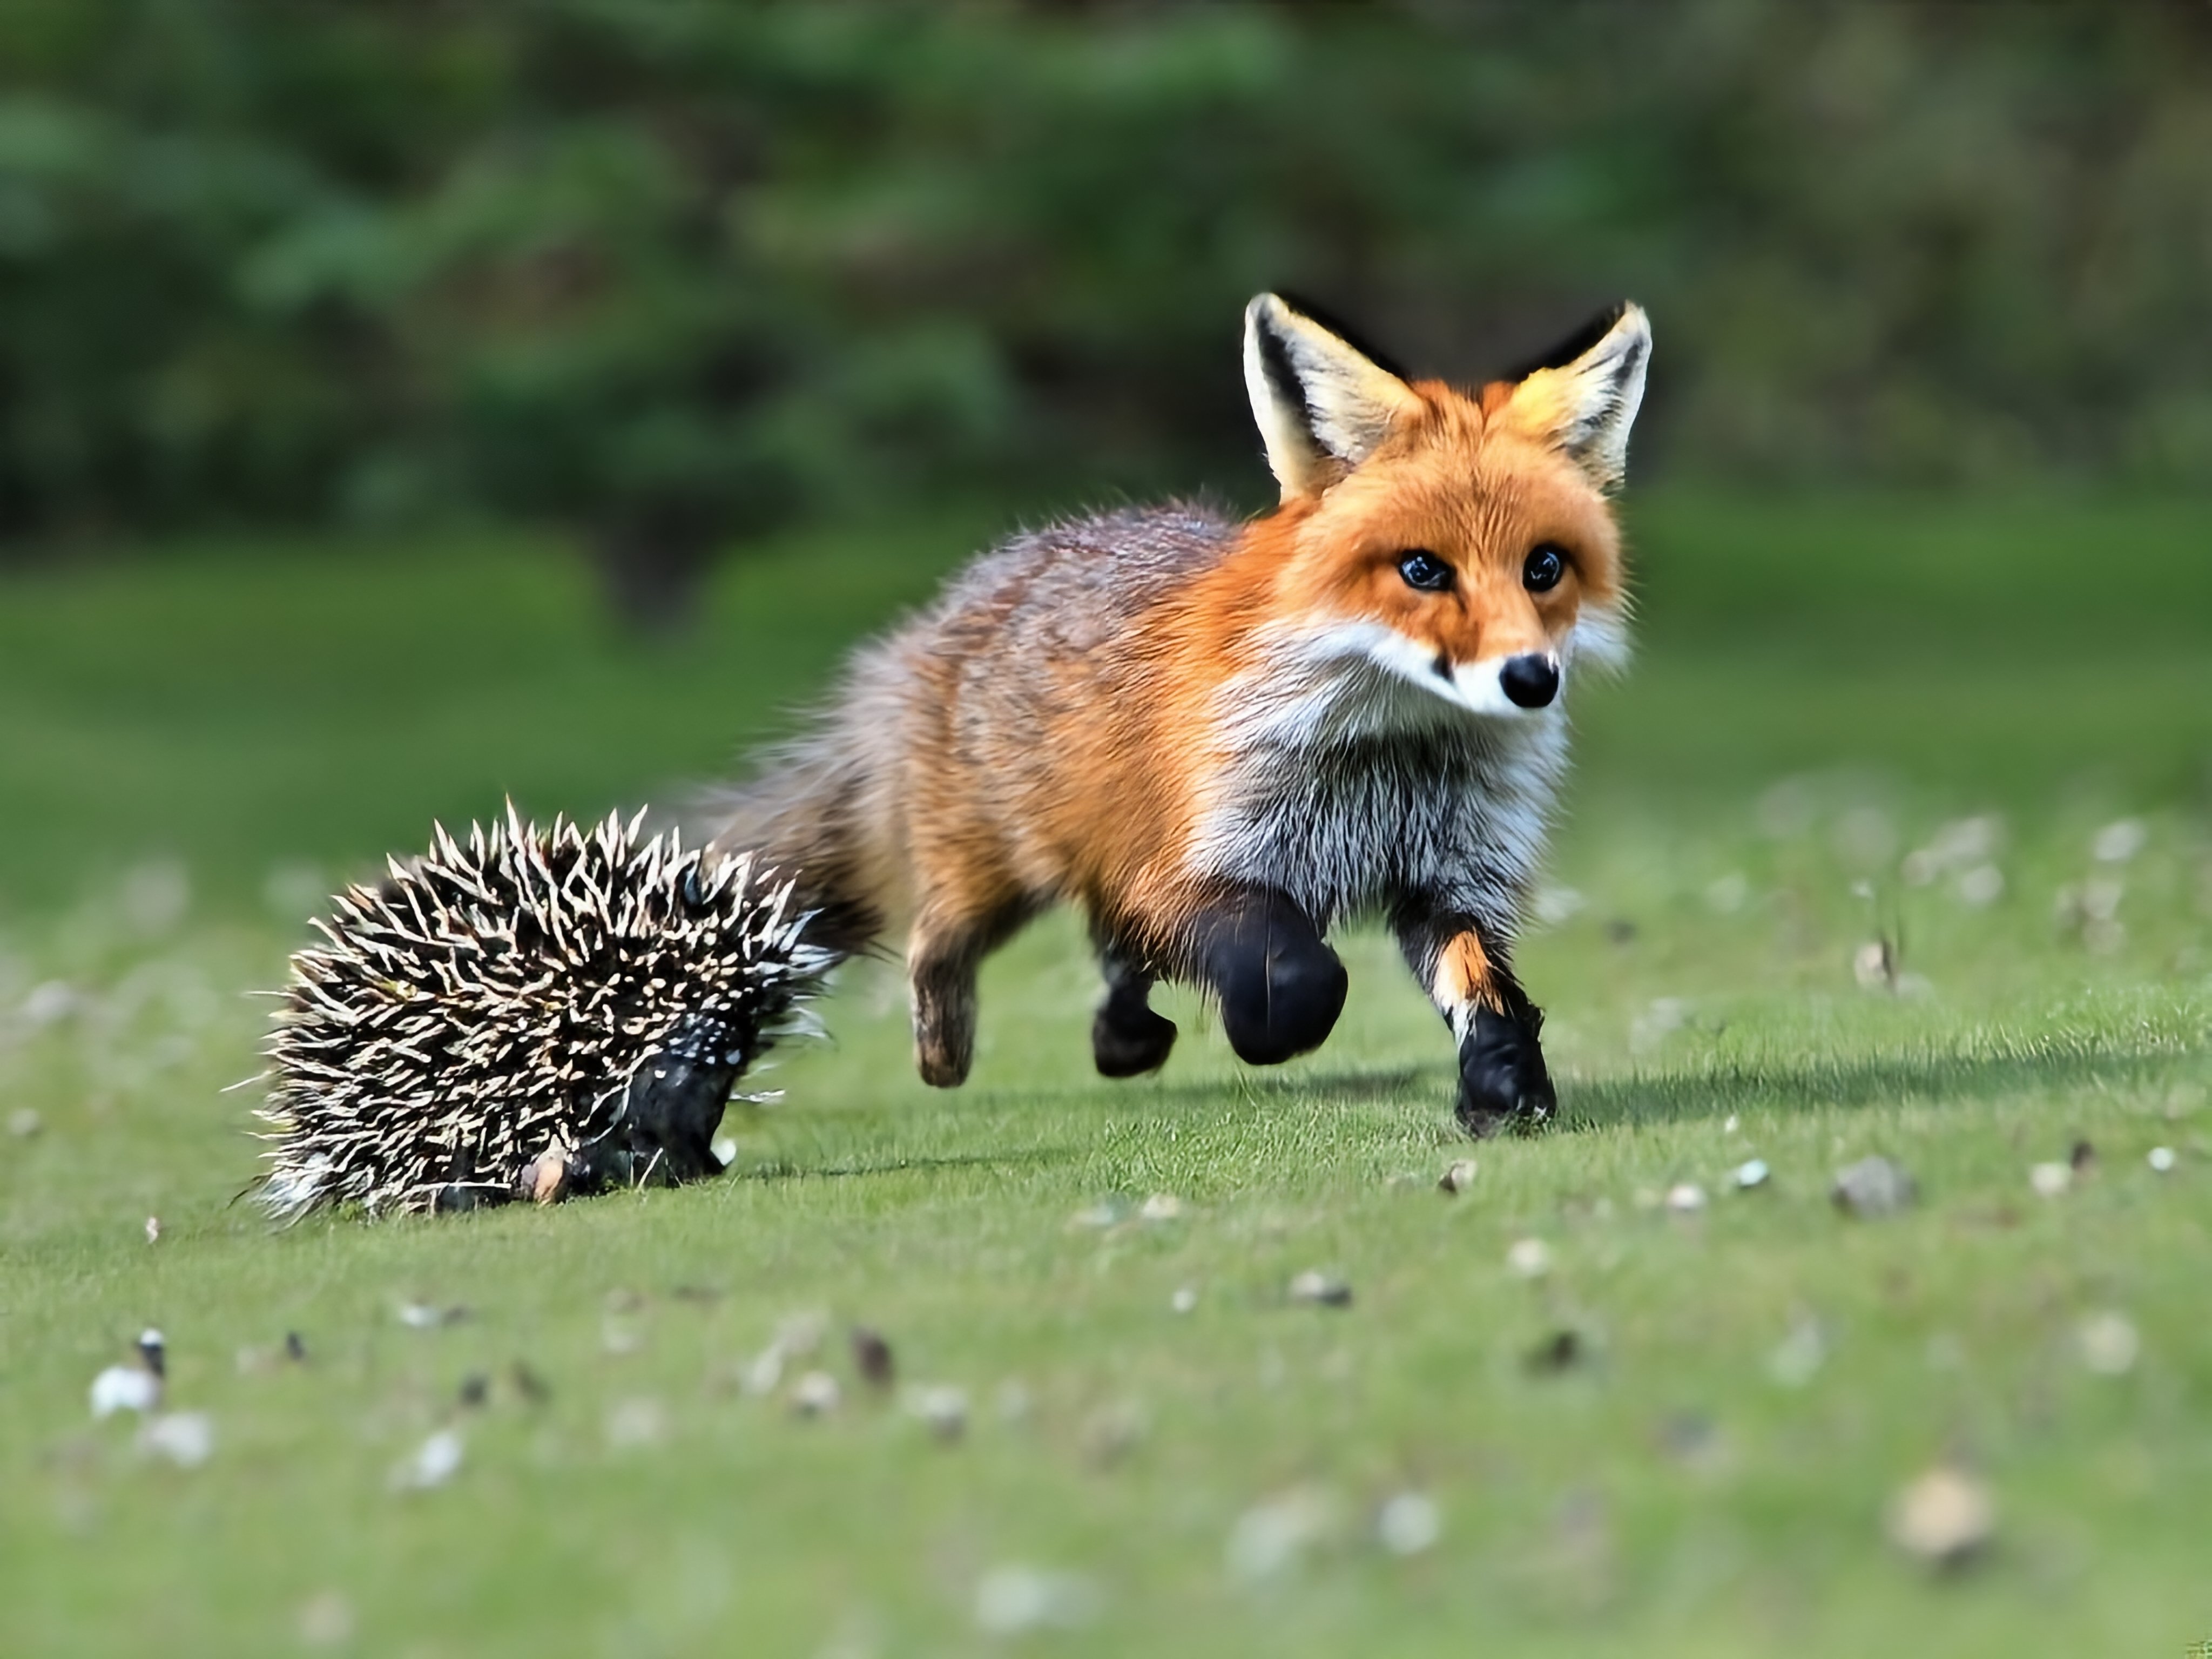 A race between the fox and the hedgehog concept